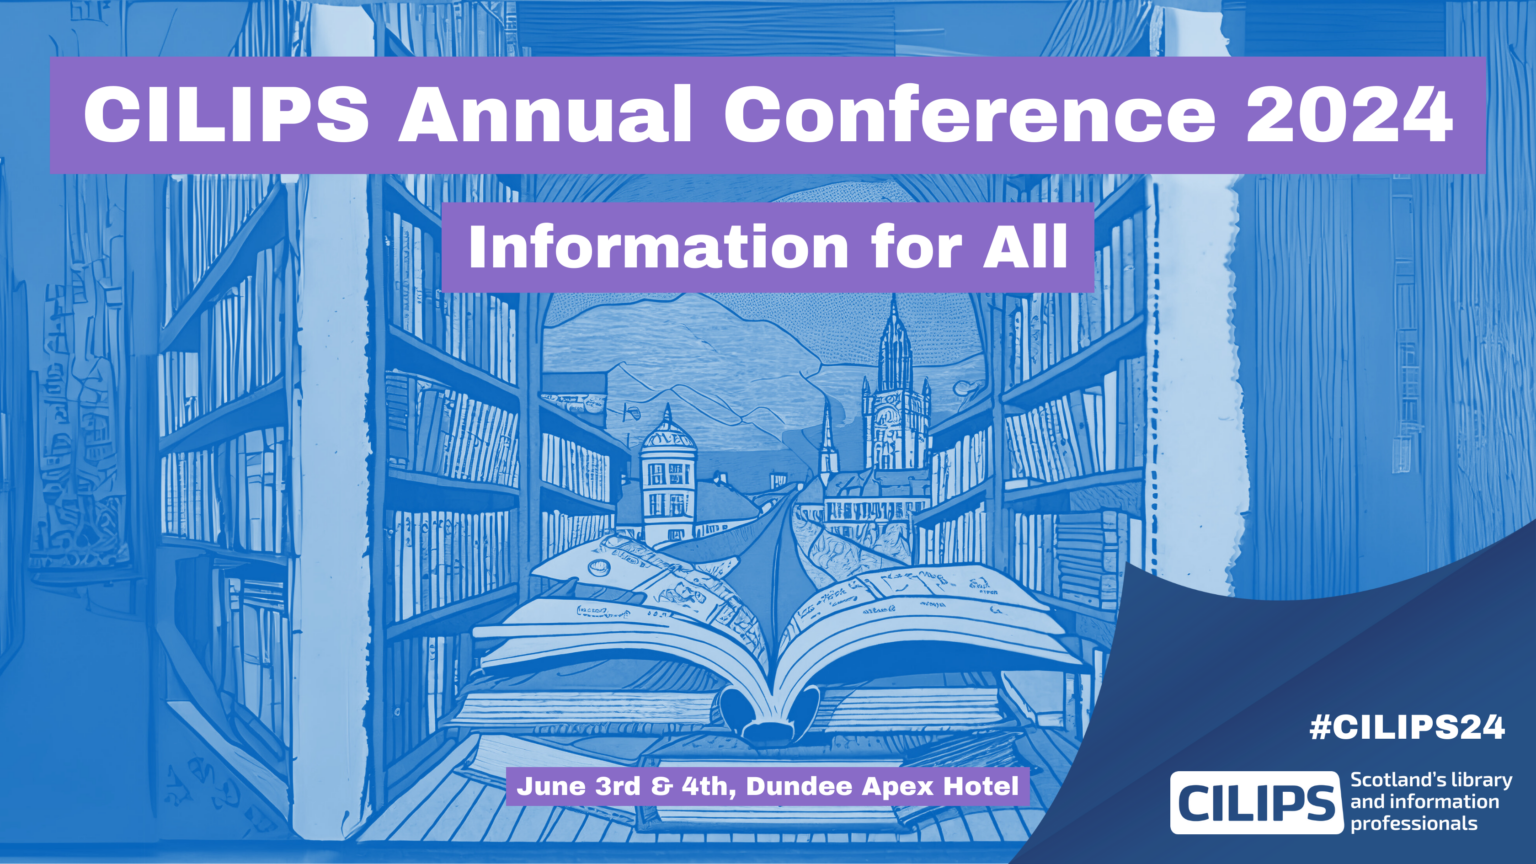 CILIPS Annual Conference 2024: Information for All. June 3rd and 4th, Dundee Apex Hotel.